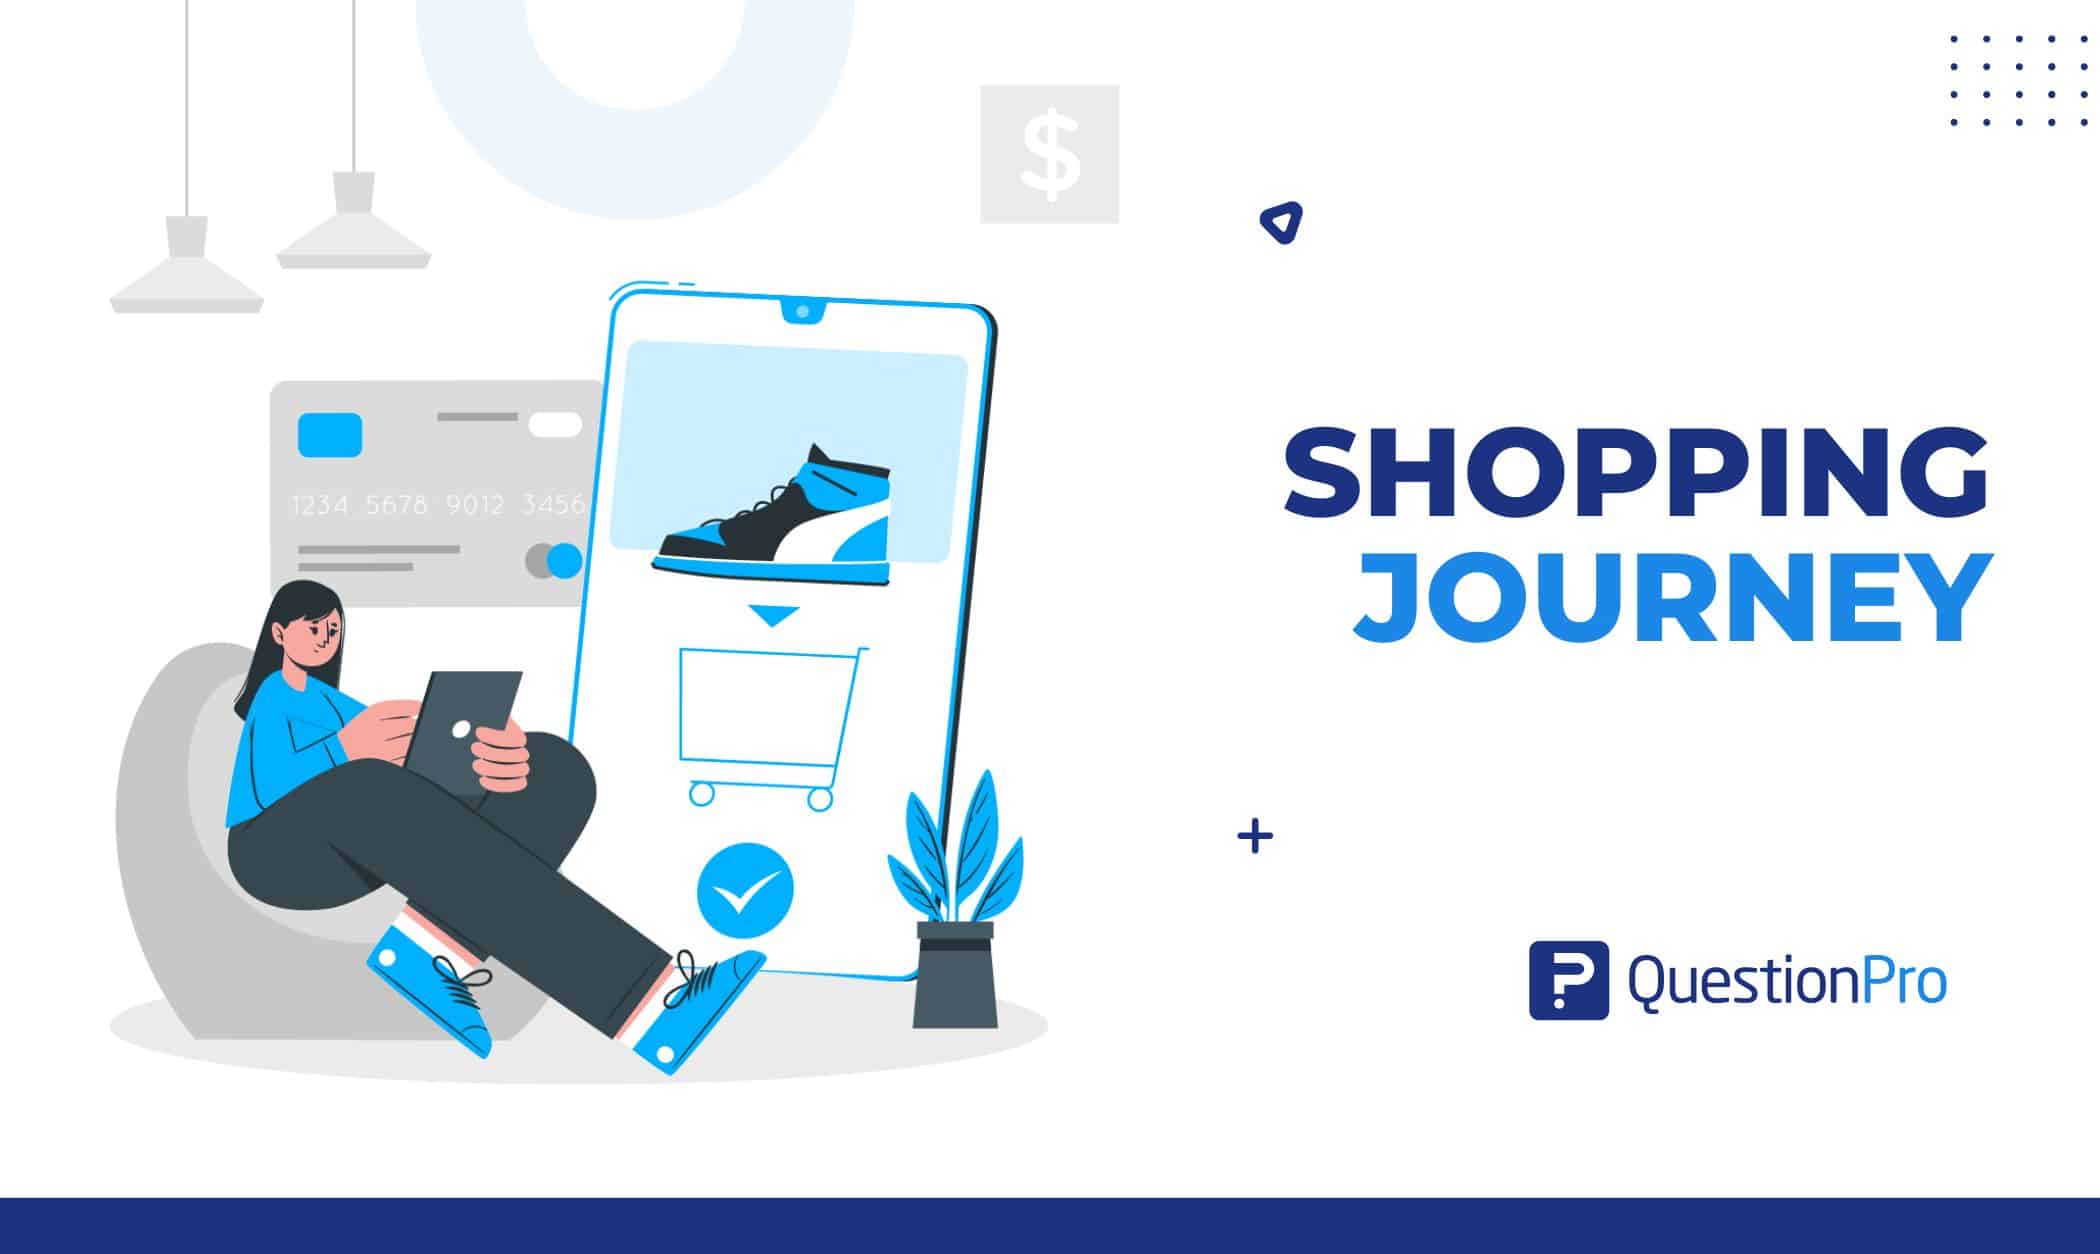 The shopping journey refers to everything a customer does and feels while buying something from a company. Explore more in this article.